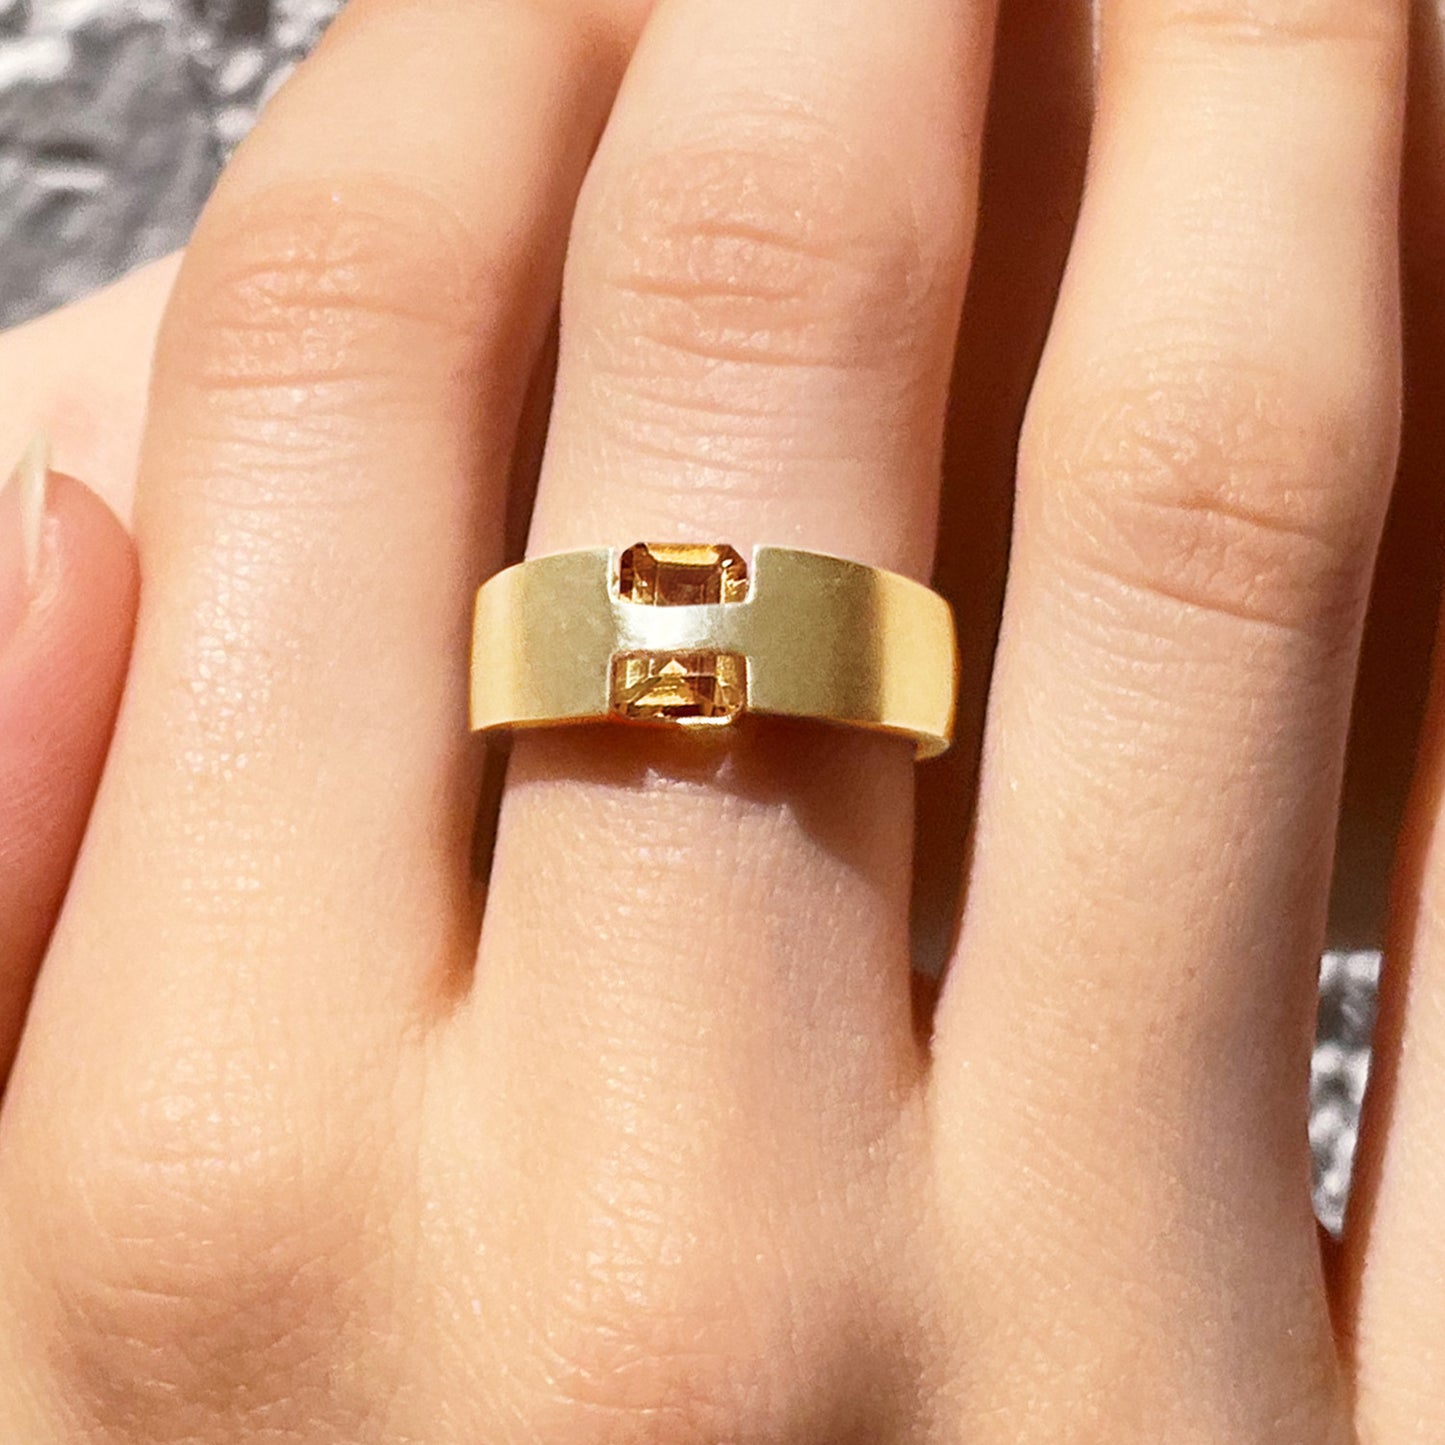 [Citrine] hide and sparkle gold #exploring